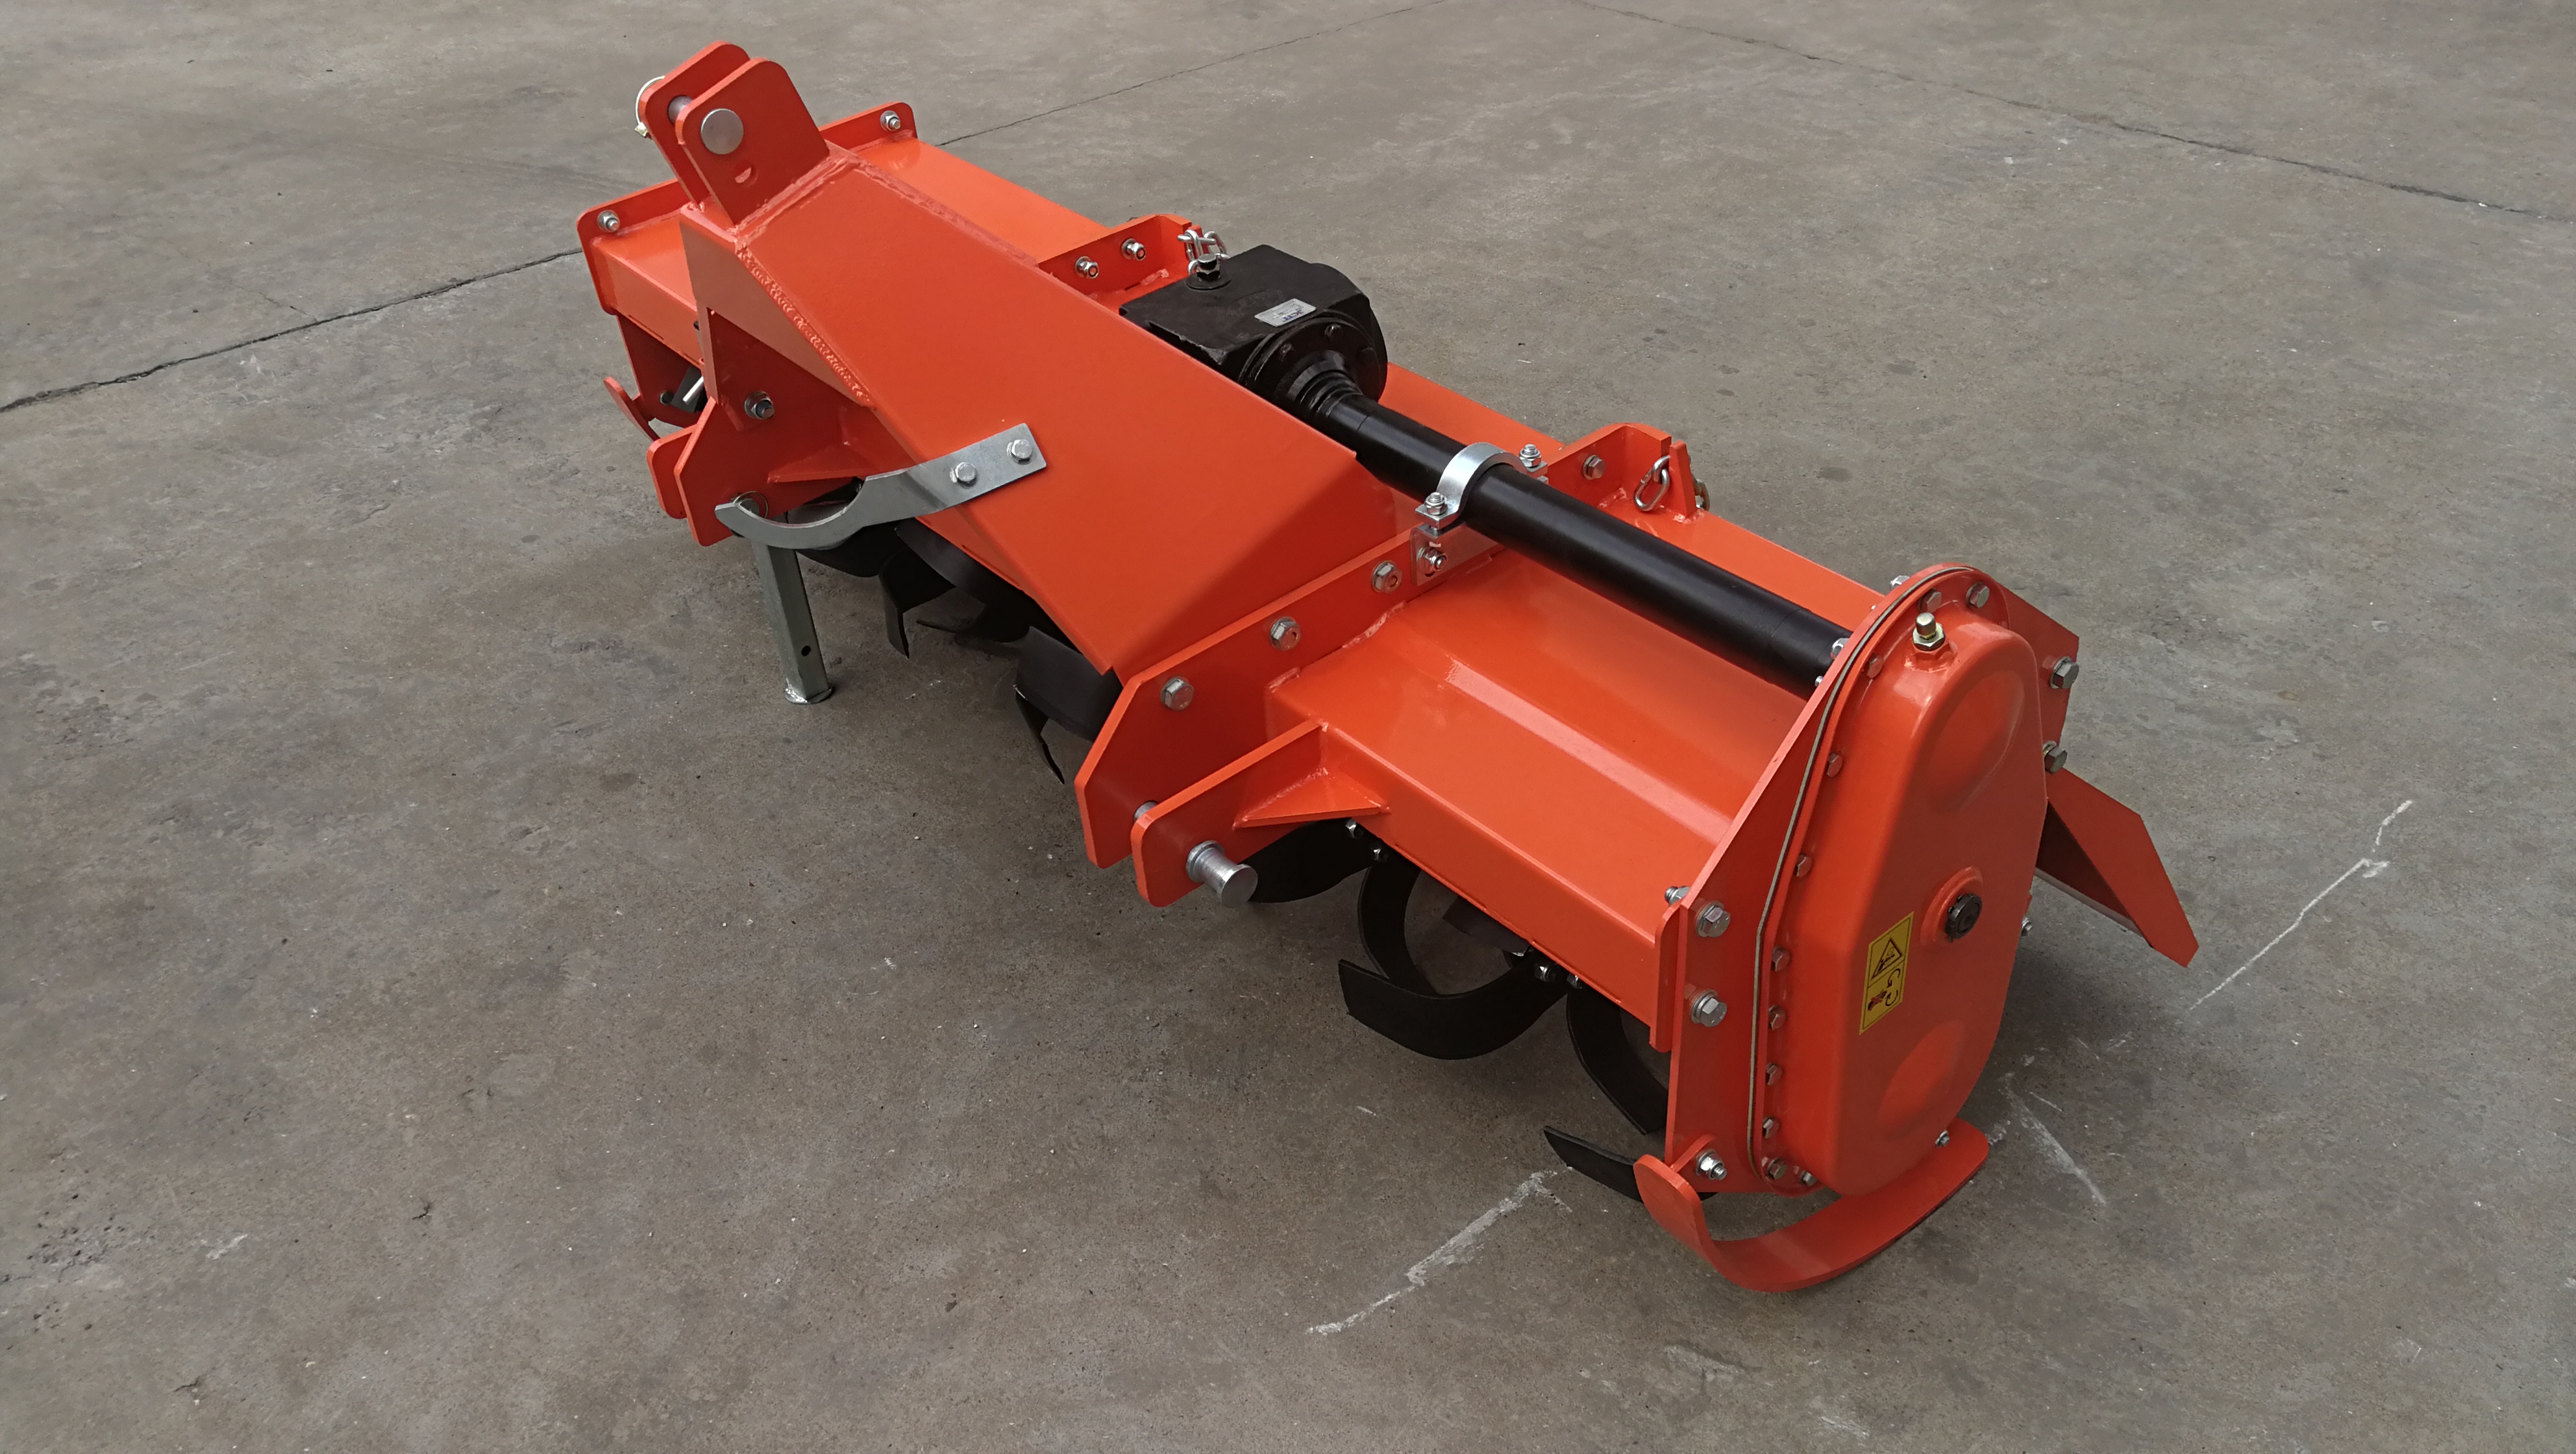  Tractor-frees HTLH ROTARY TILLER 